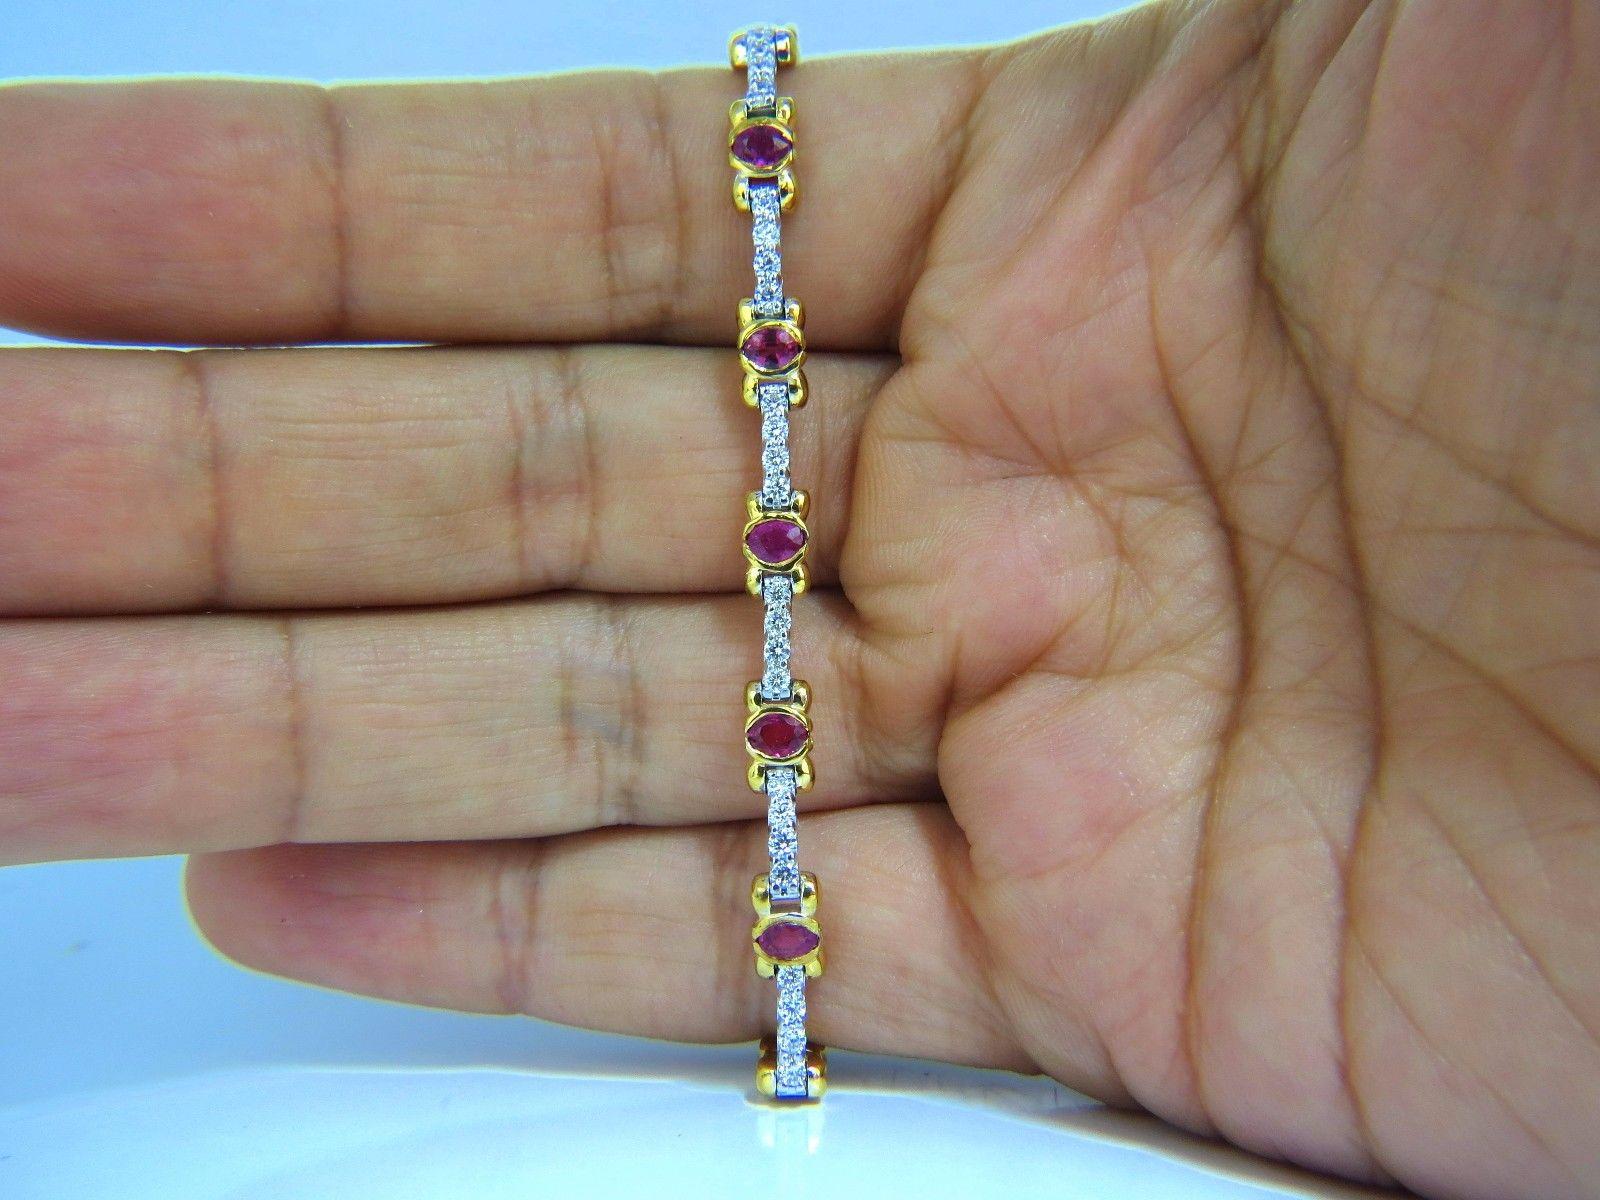 Classic Alternated Tennis / Two toned

2.50ct. Natural Ruby Tennis bracelet.

oval cuts, Fully Faceted.

Vivid Vibrant Red, excellent Sparkle.

Clean Clarity & Transparent.

3.4 X 2.2mm average each.

1.26ct. natural diamonds:

Rounds, Full